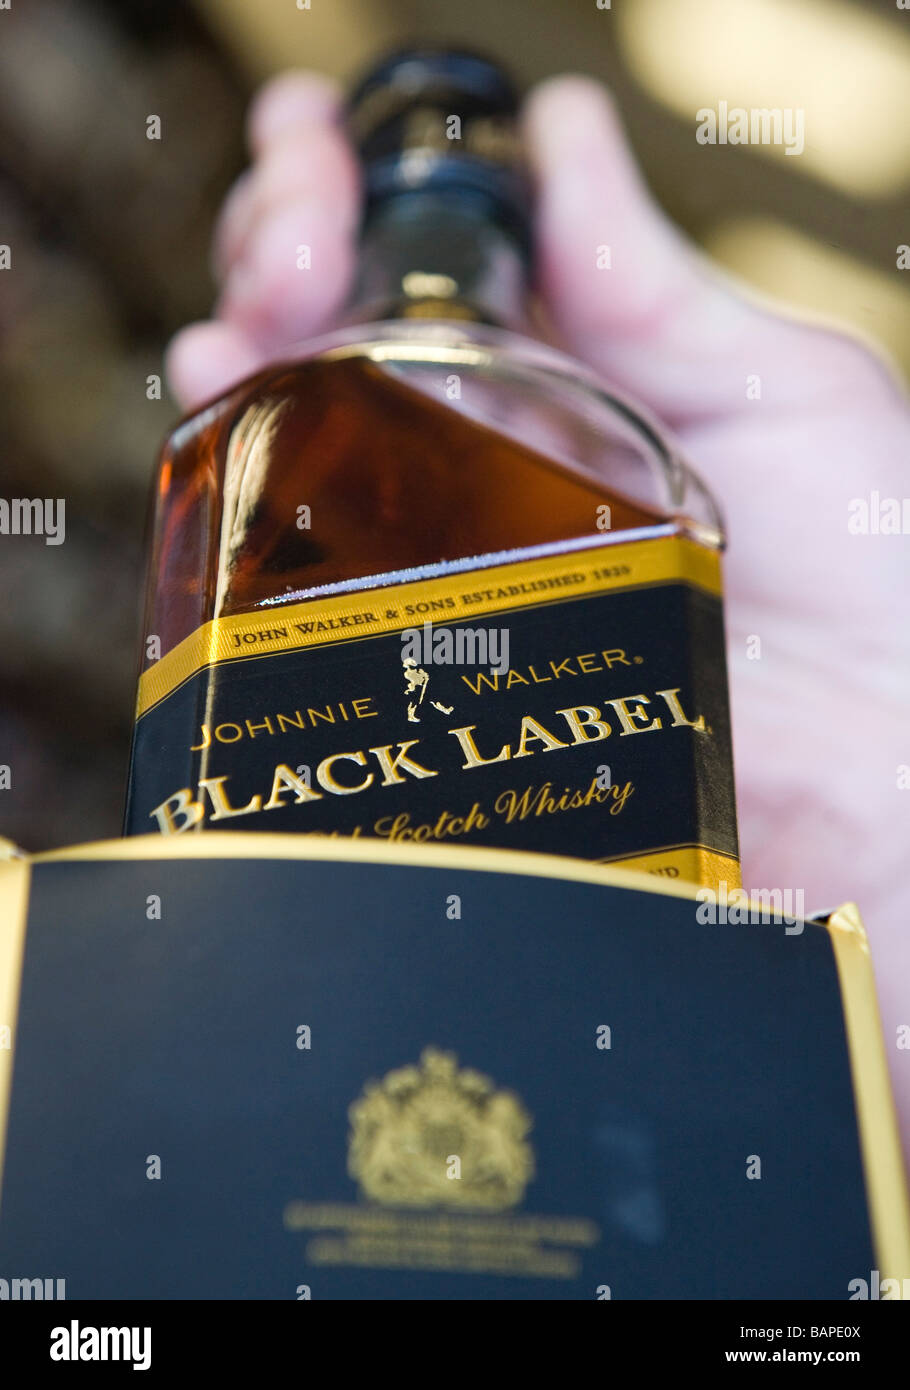 Johnnie Walker Black Label High Resolution Stock Photography And Images Alamy